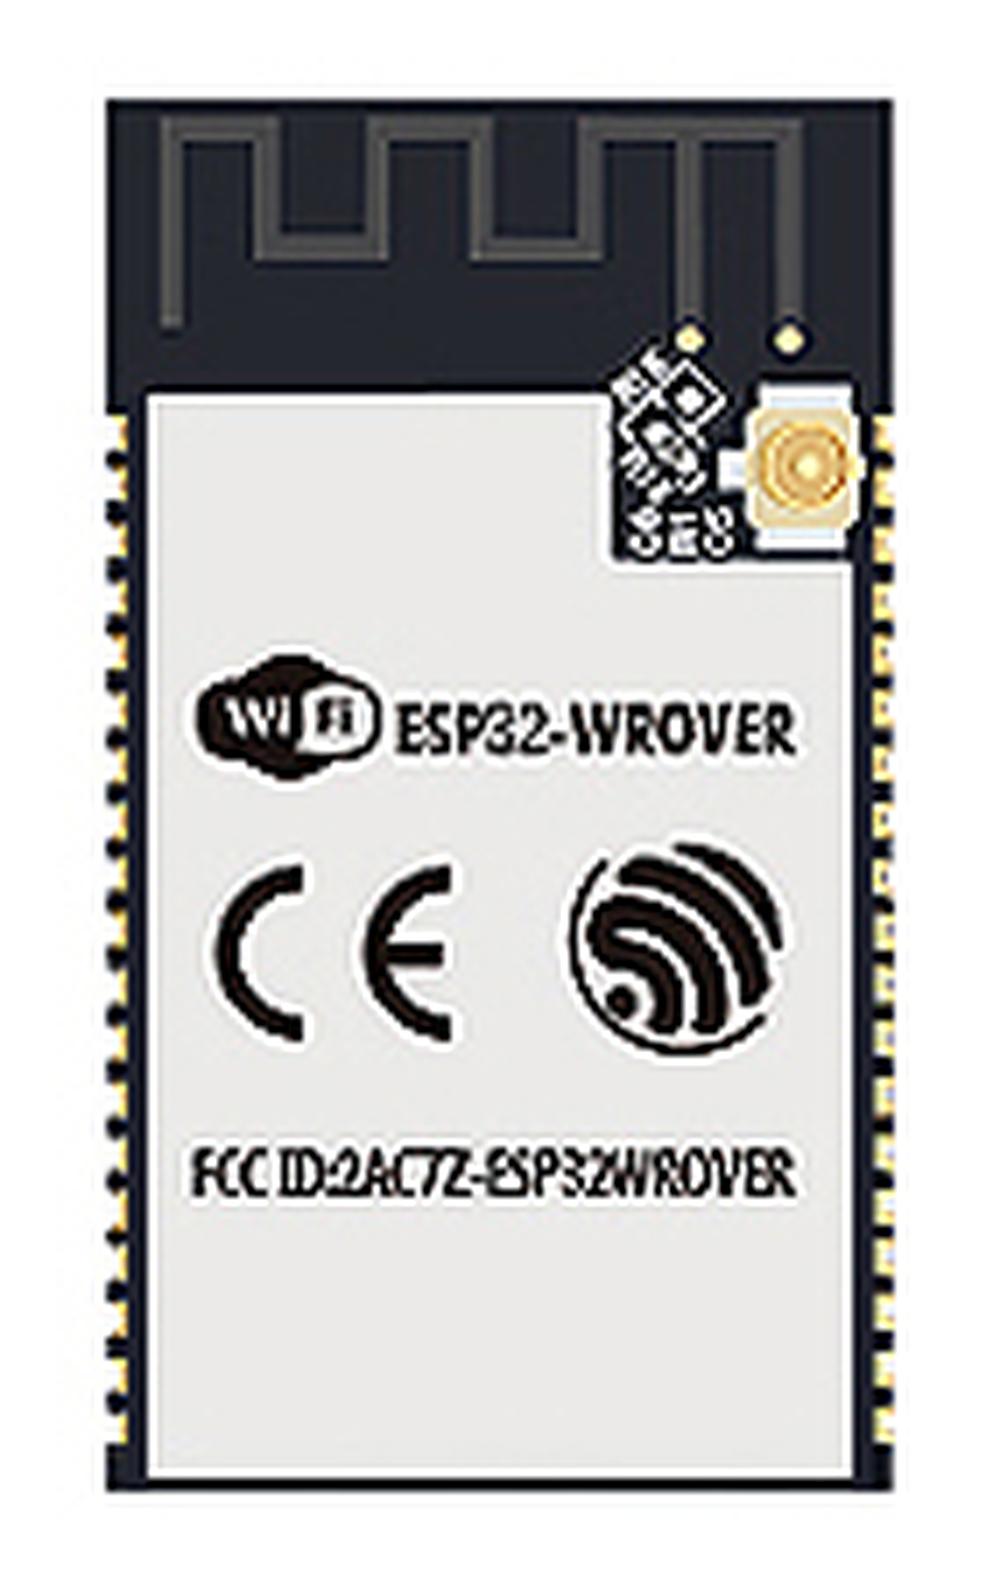 Reliable WiFi connection and kits with ESP32